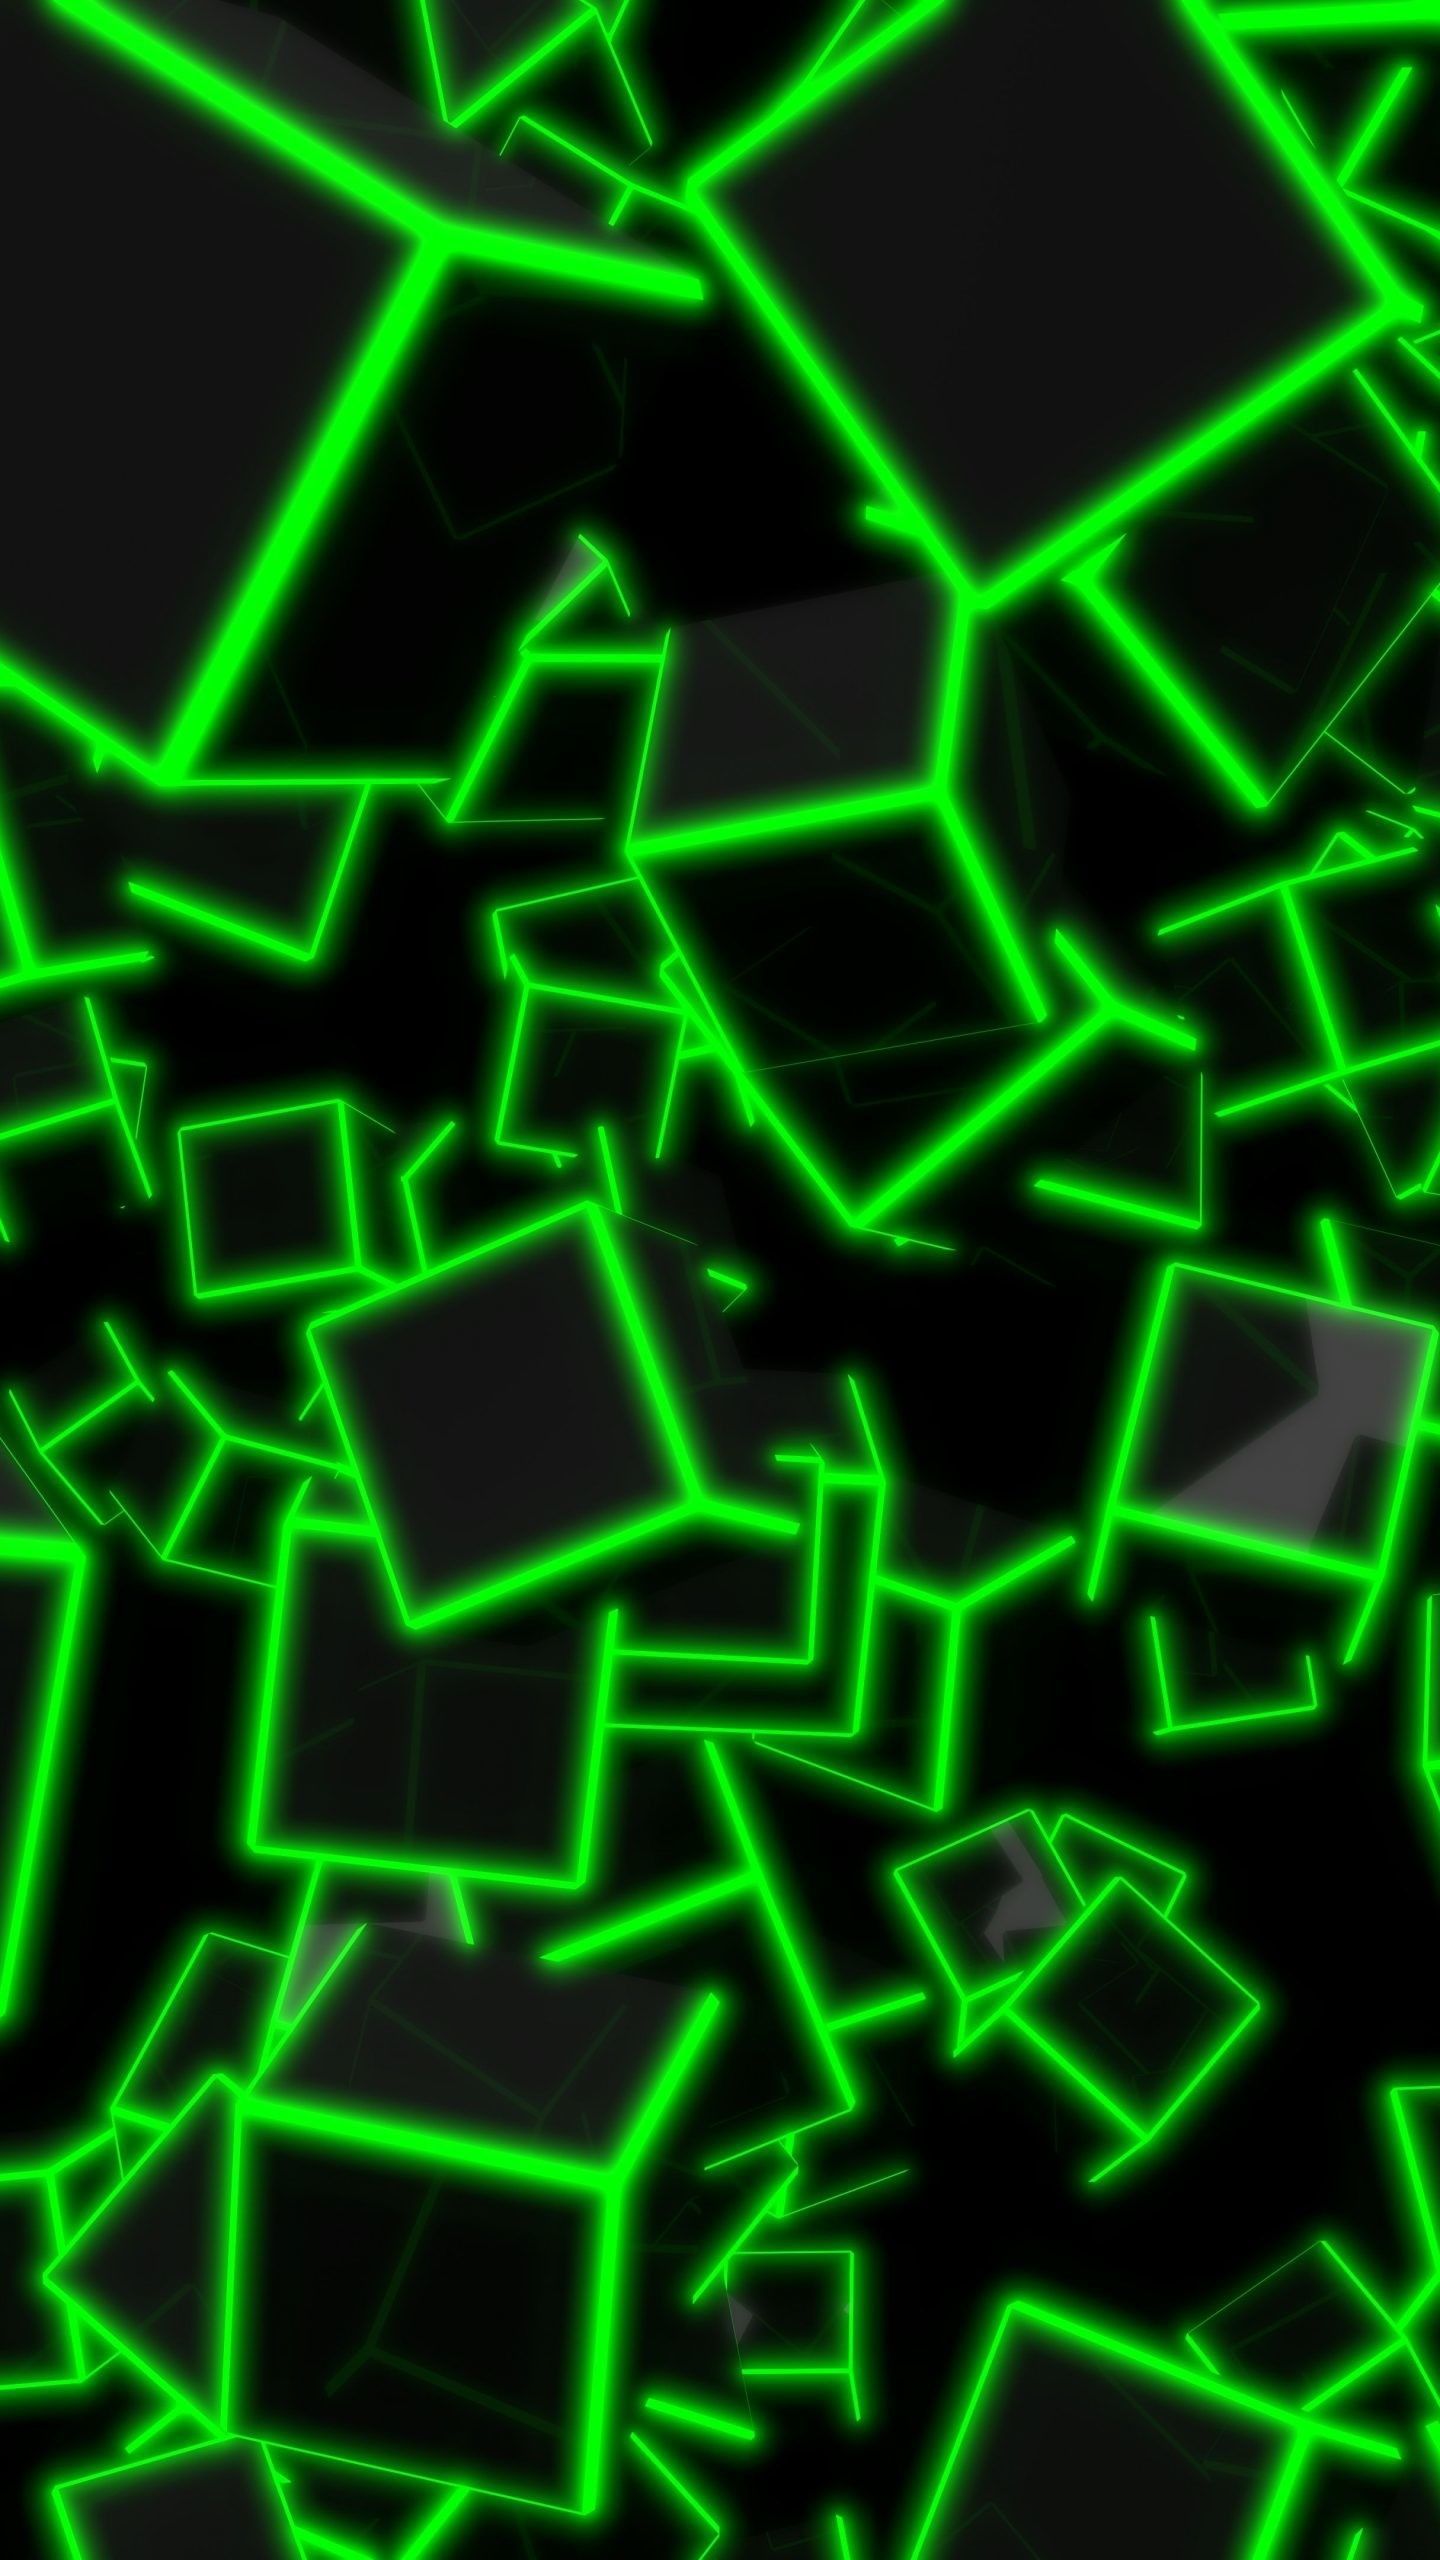 Neon green and black aesthetic wallpapers